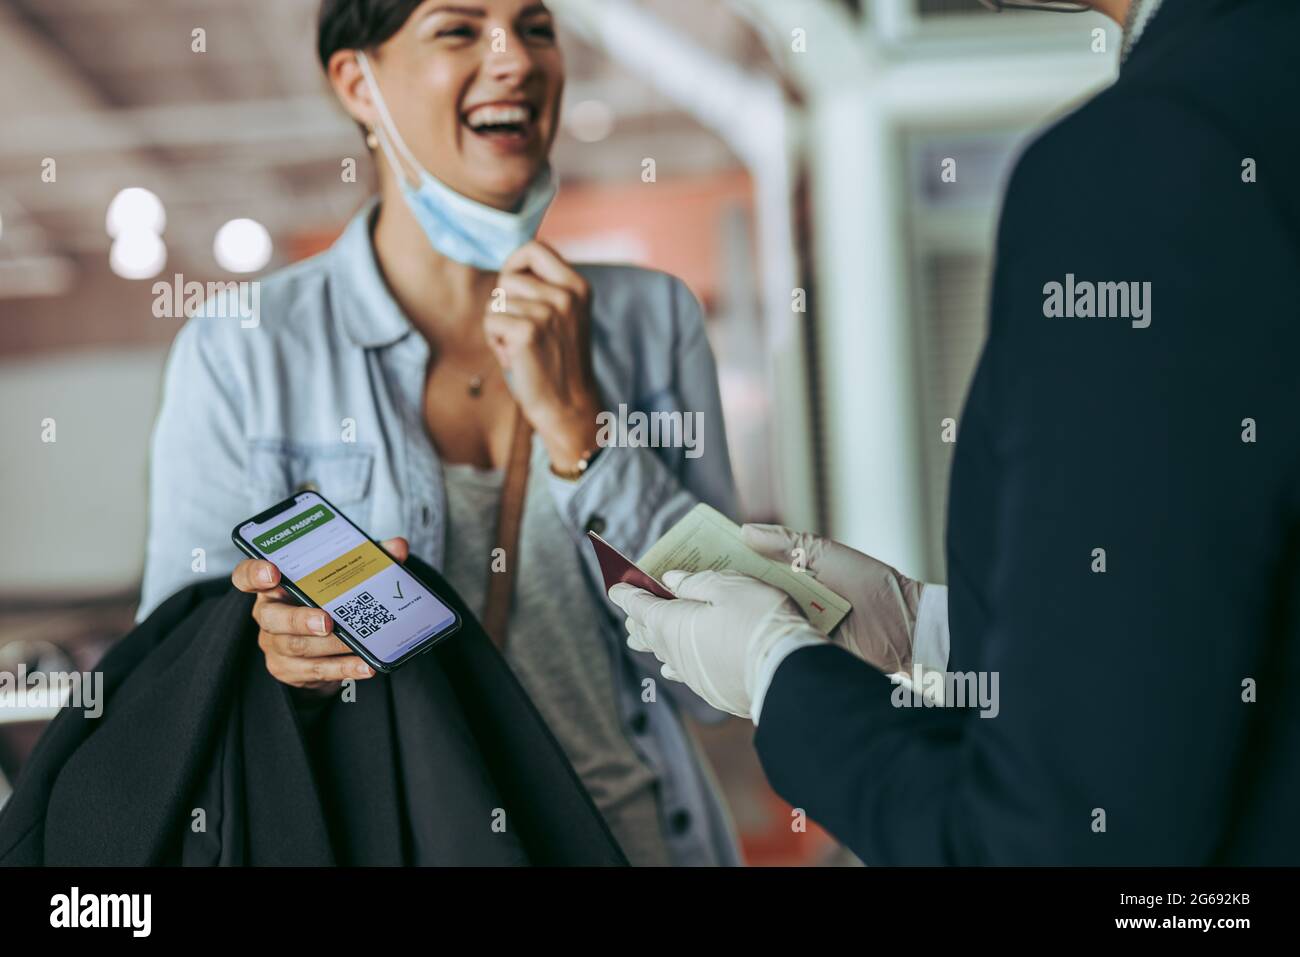 Woman traveler showing vaccine passport at check-in counter of airport. Female at checking counter displaying corona virus vaccine passport. Stock Photo